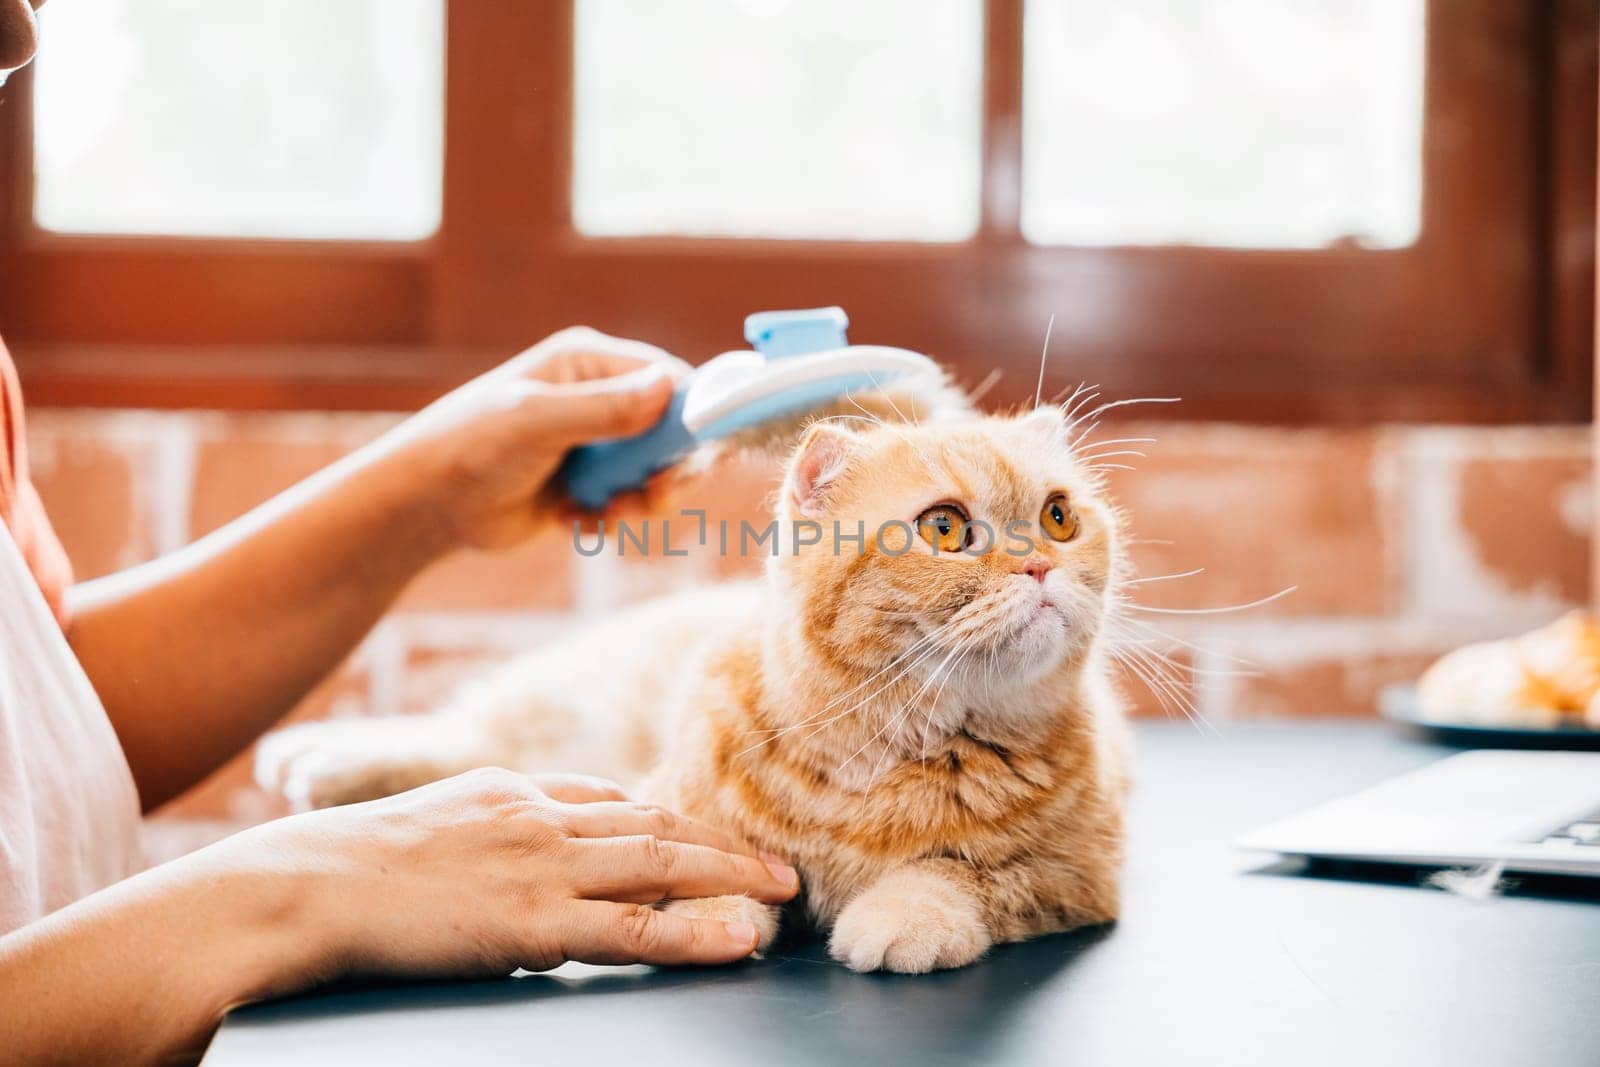 A woman, in her elderly years, engages in grooming her Scottish Fold cat to remove old fur. The bond between them is evident, adding happiness to their home. by Sorapop